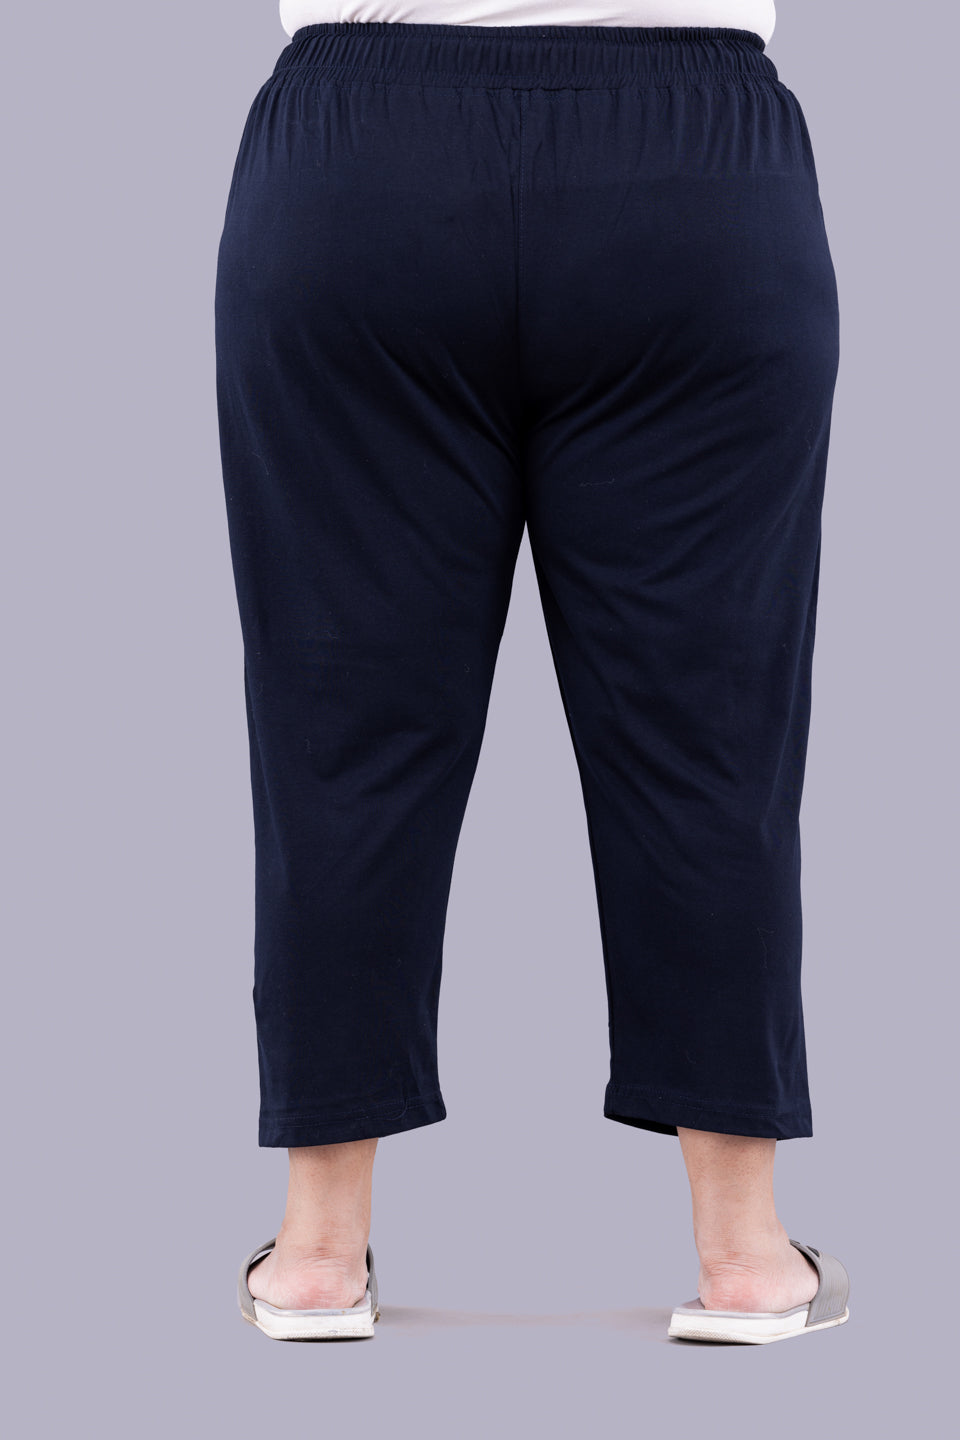 Stylish Navy Blue Cotton Half Capris For Women online in India